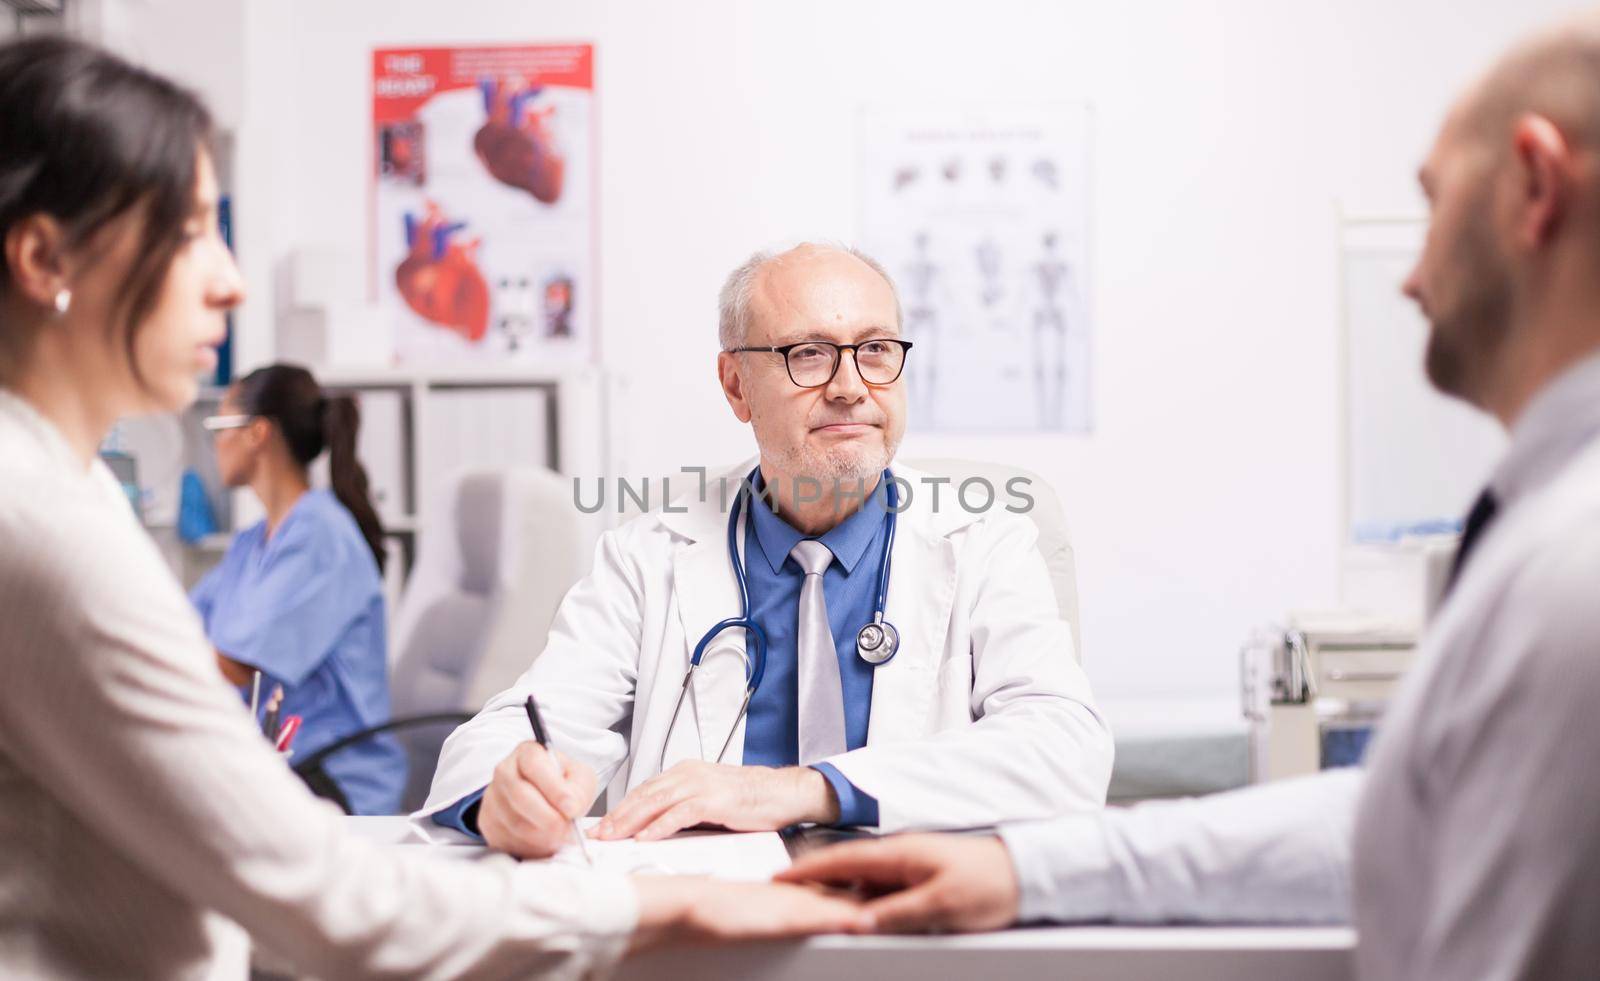 Worried couple holding hands during medical check in hospital office. Senior doctor with grey hair wearing white coat and stethoscope during examination.